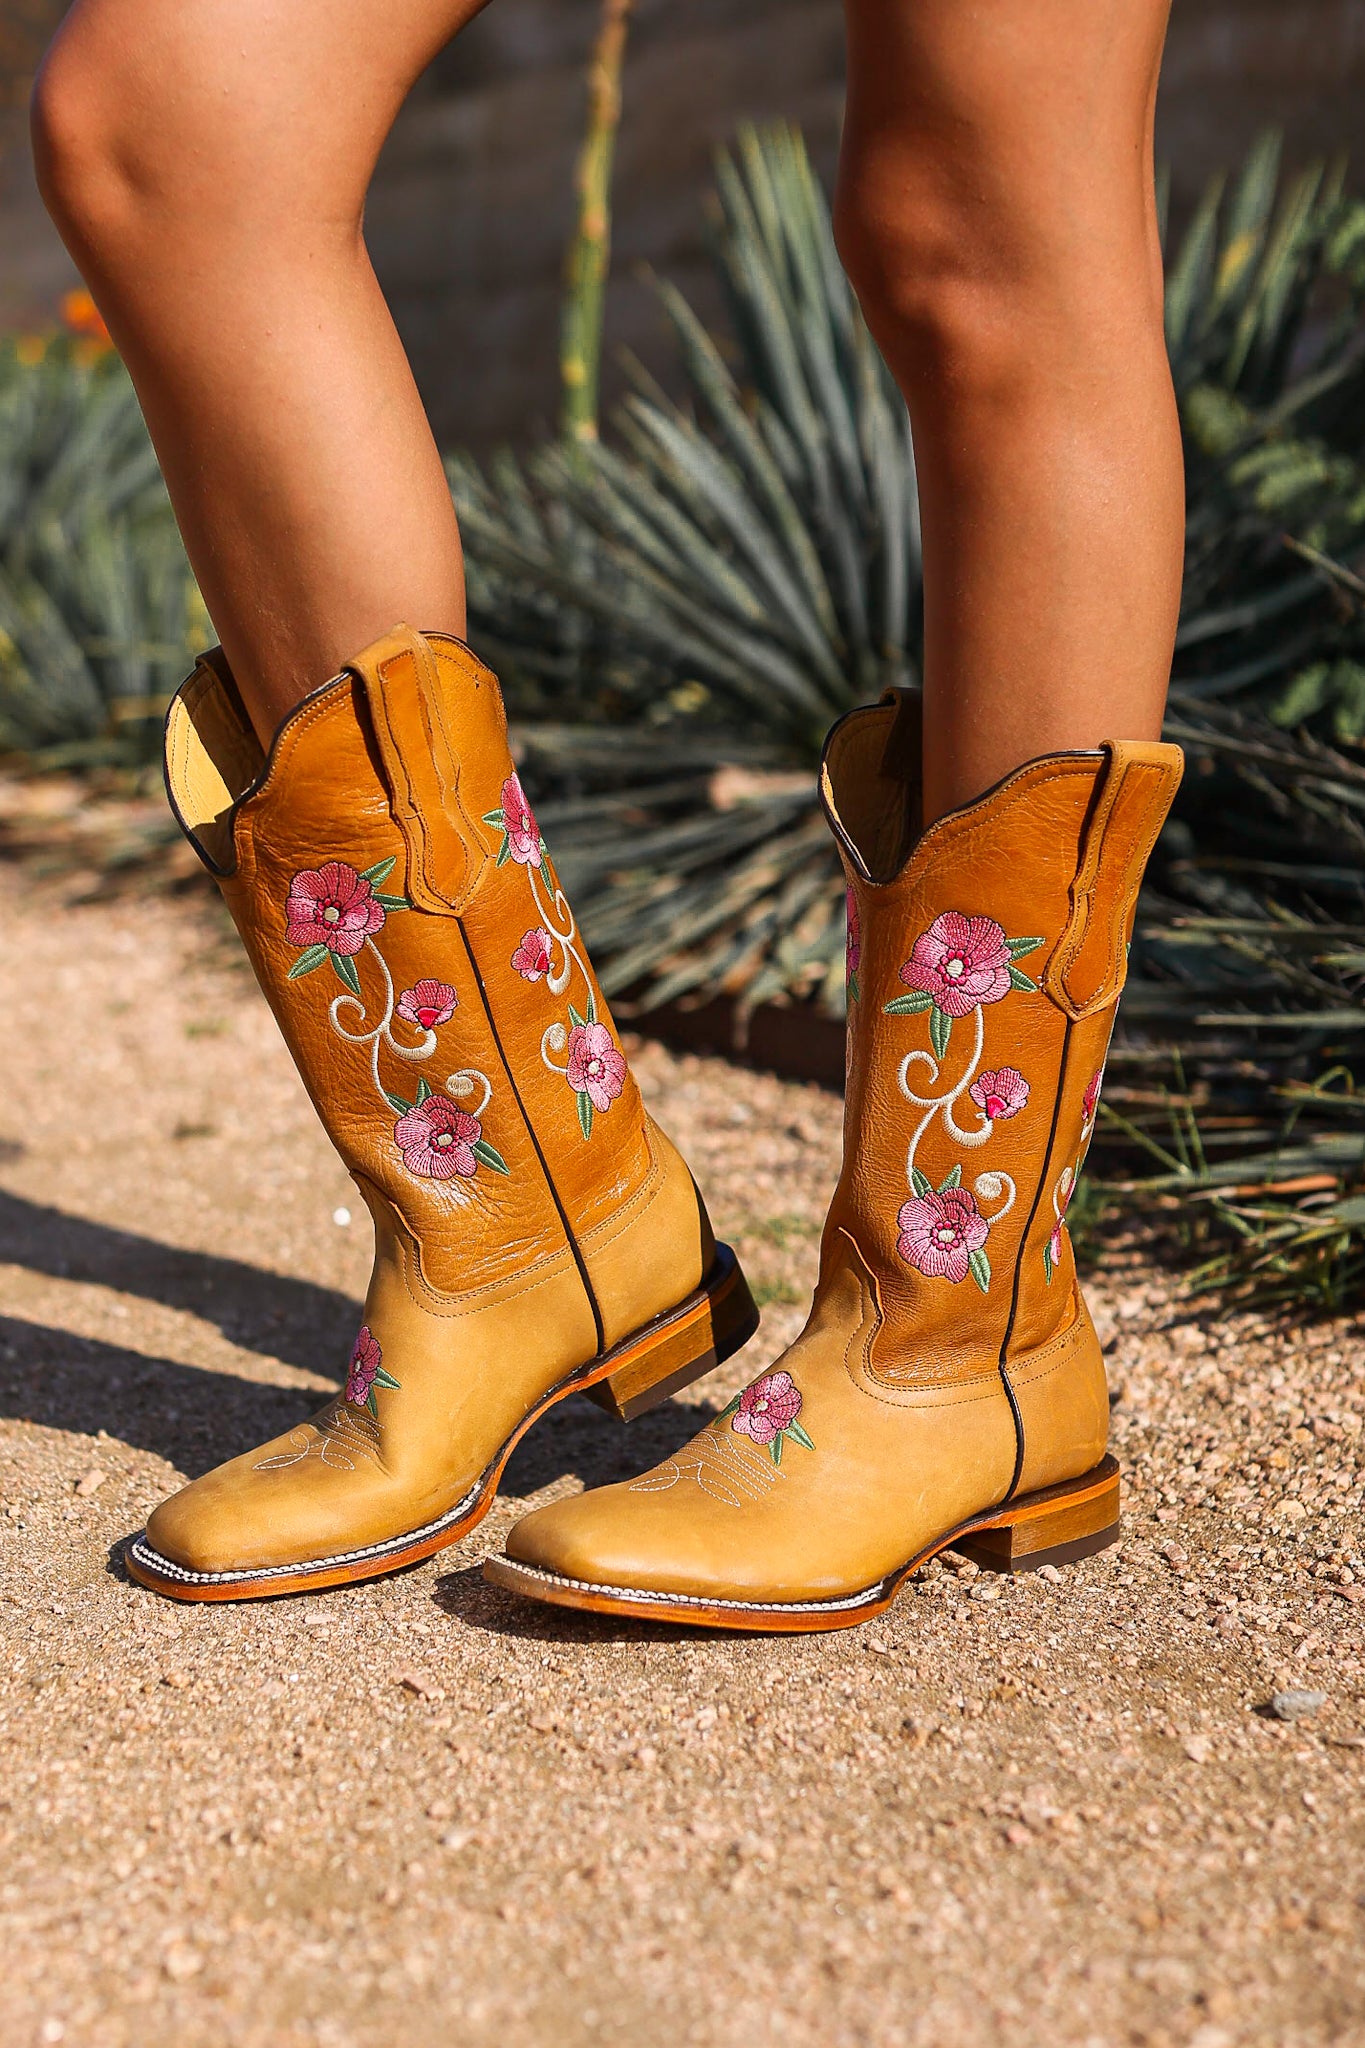 The Camelia Boot